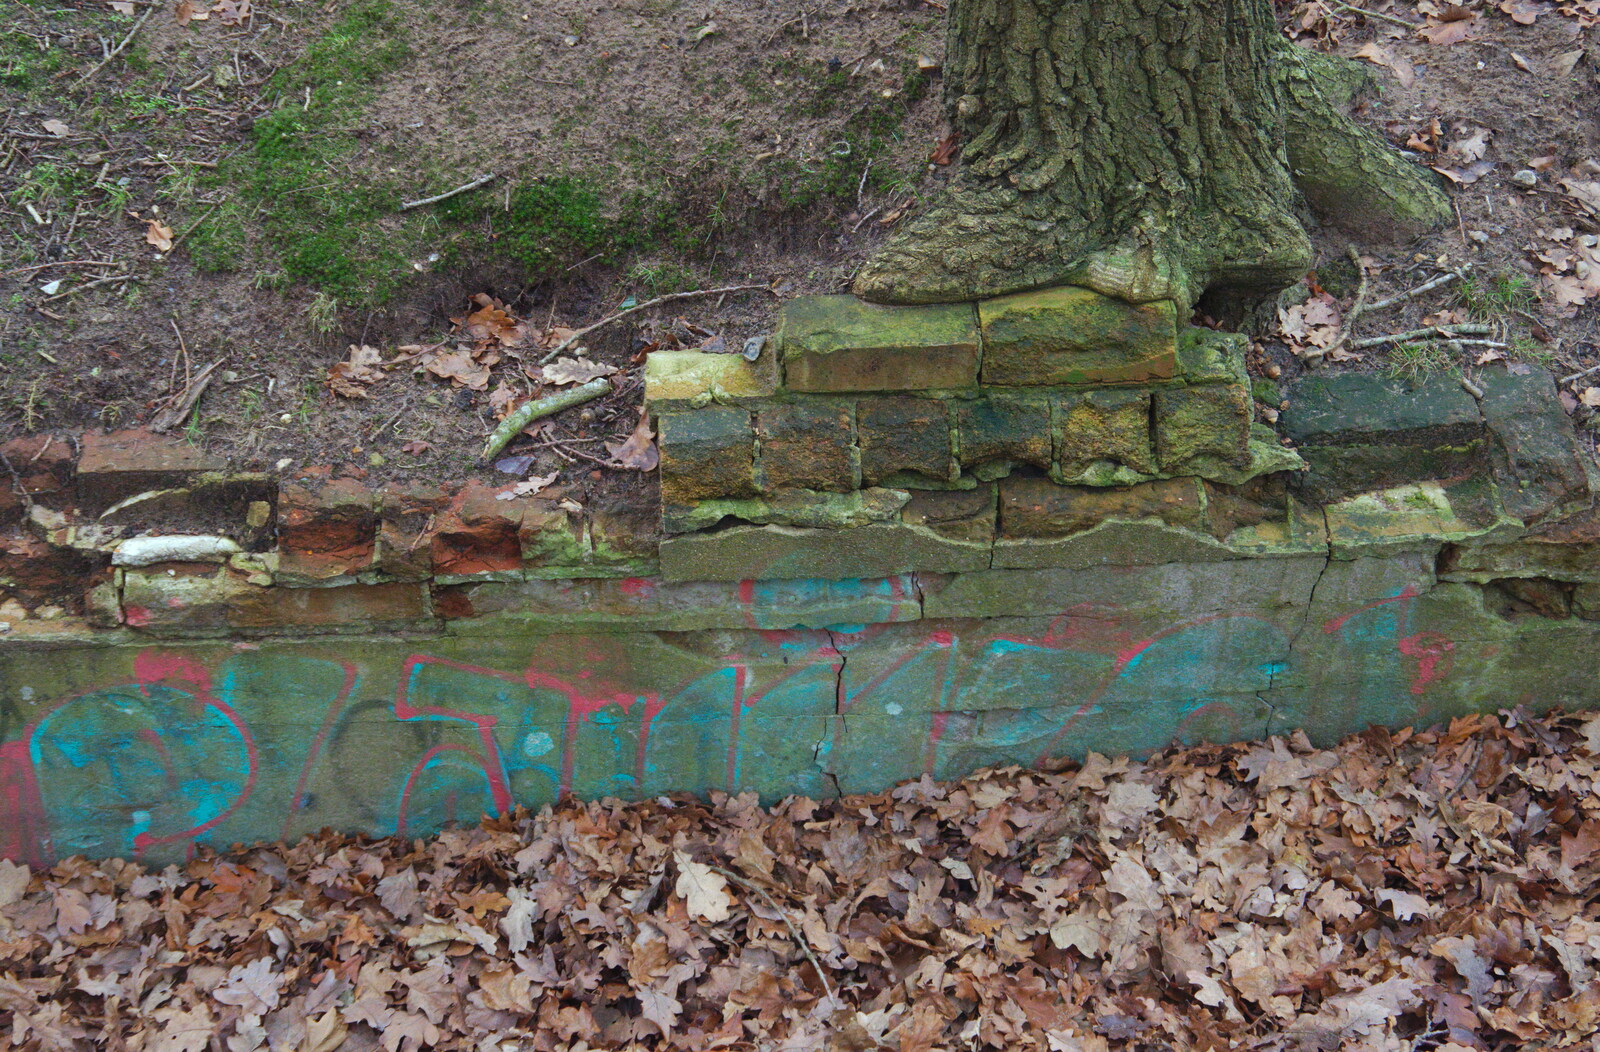 Disappearing graffiti from New Year's Day on the Ling, Wortham, Suffolk - 1st January 2020